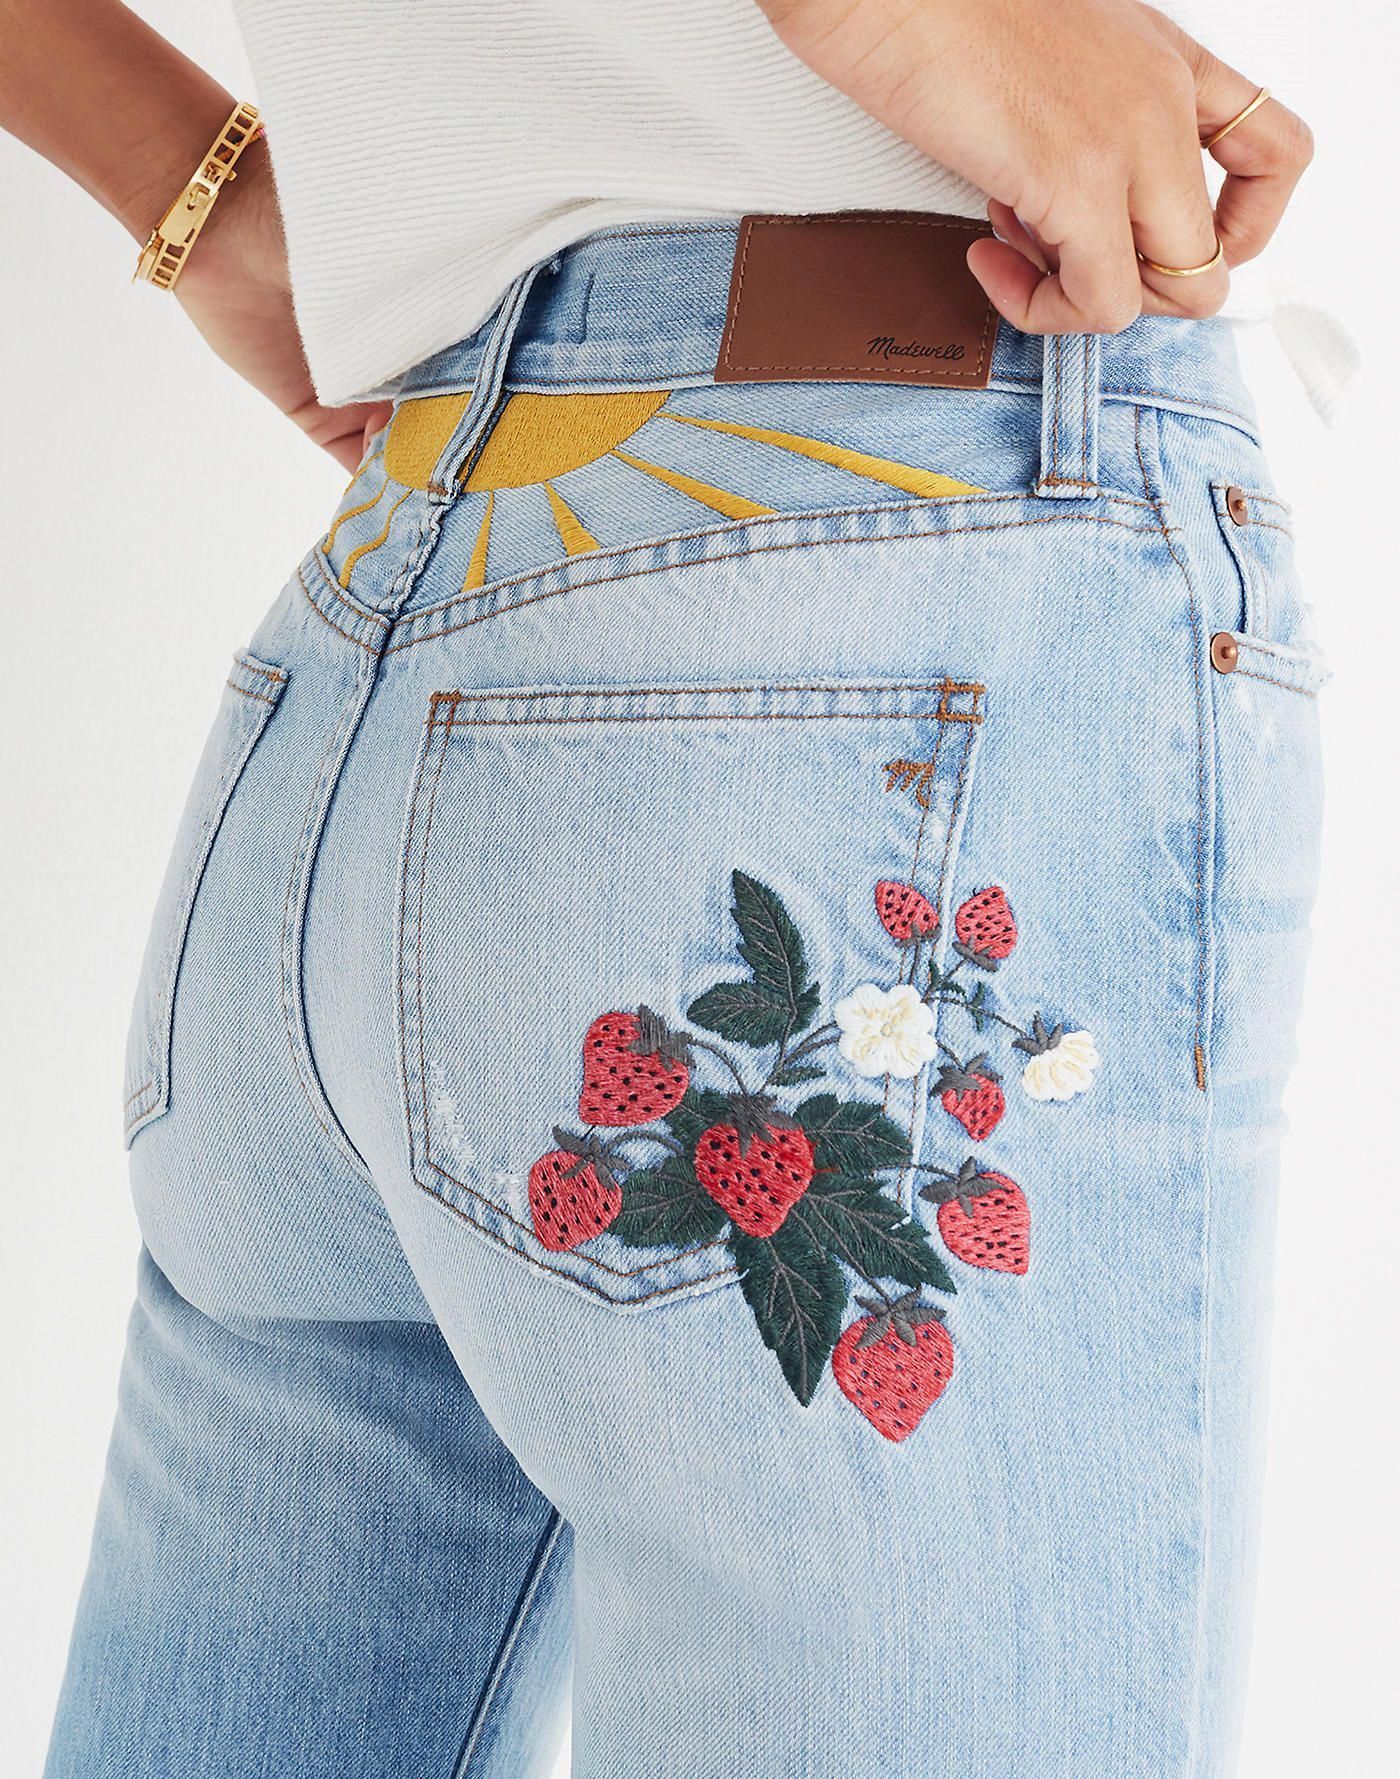 The Tall Perfect Summer Jean: Strawberry Embroidered Edition - The Tall Perfect Summer Jean: Strawberry Embroidered Edition -   14 diy Fashion inspiration ideas